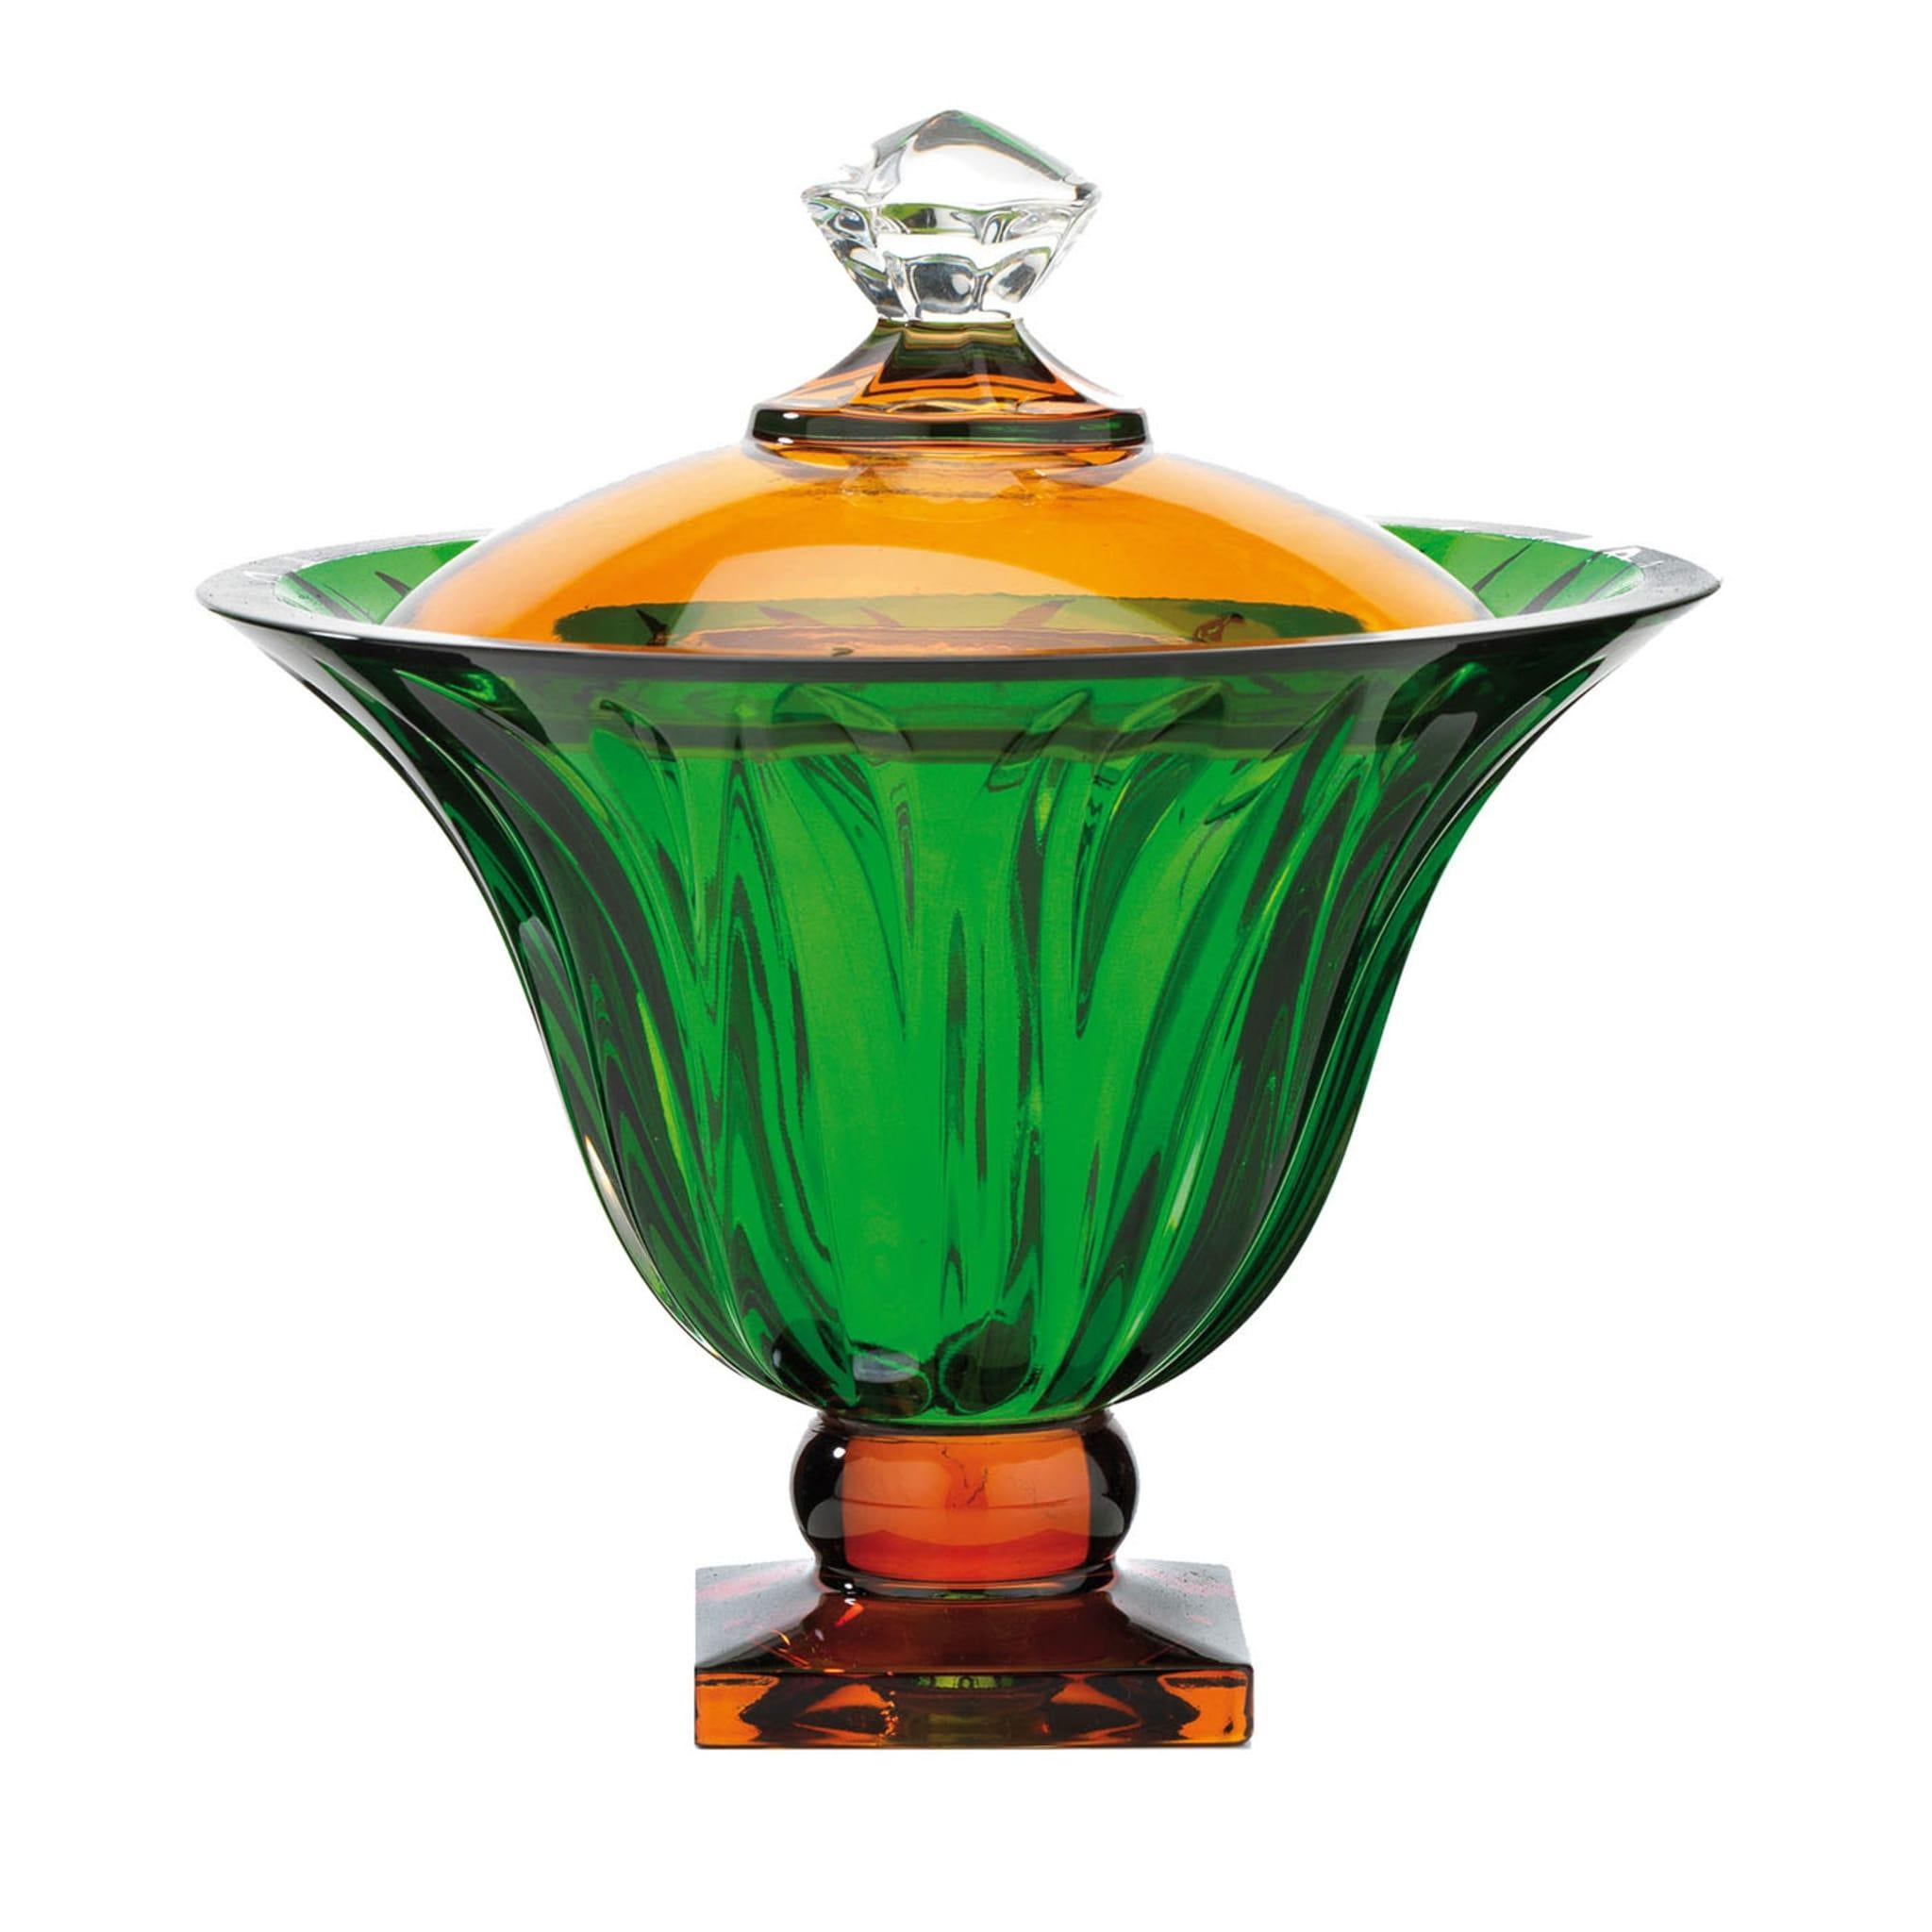 Traditional and contemporary influences harmoniously coexist in this precious crystal box. Offered in a vibrant combination of amber and green, it is distinguished by a pleasant texture extending throughout the bell-like bowl, while the lid and